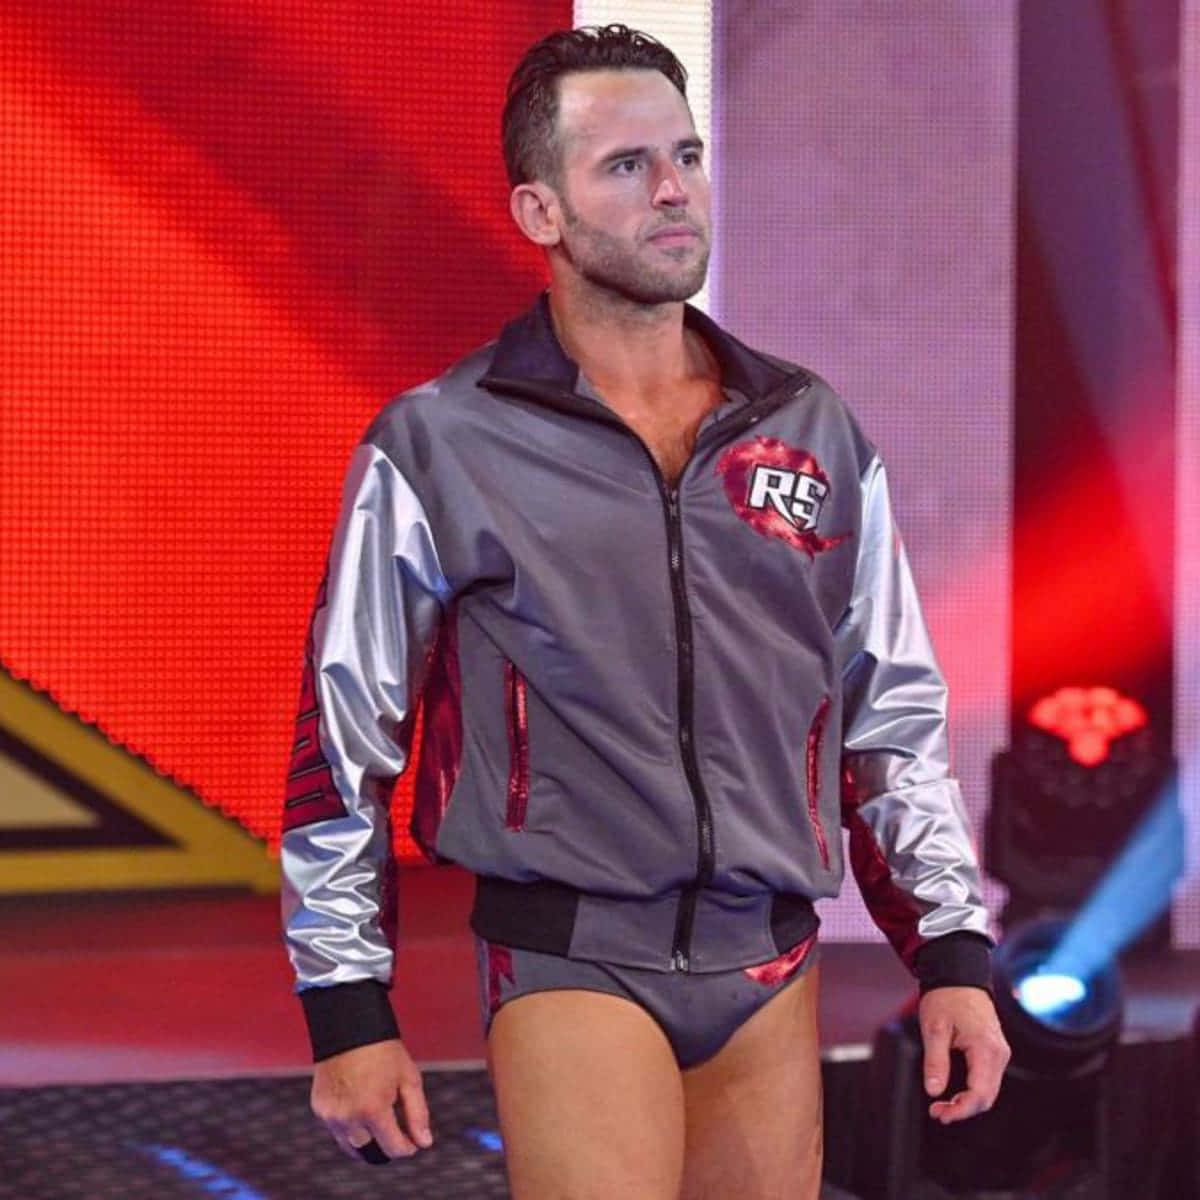 Roderick Strong, the Professional Wrestler, Posing Confidently in His Sports Jacket and Singlet Wallpaper